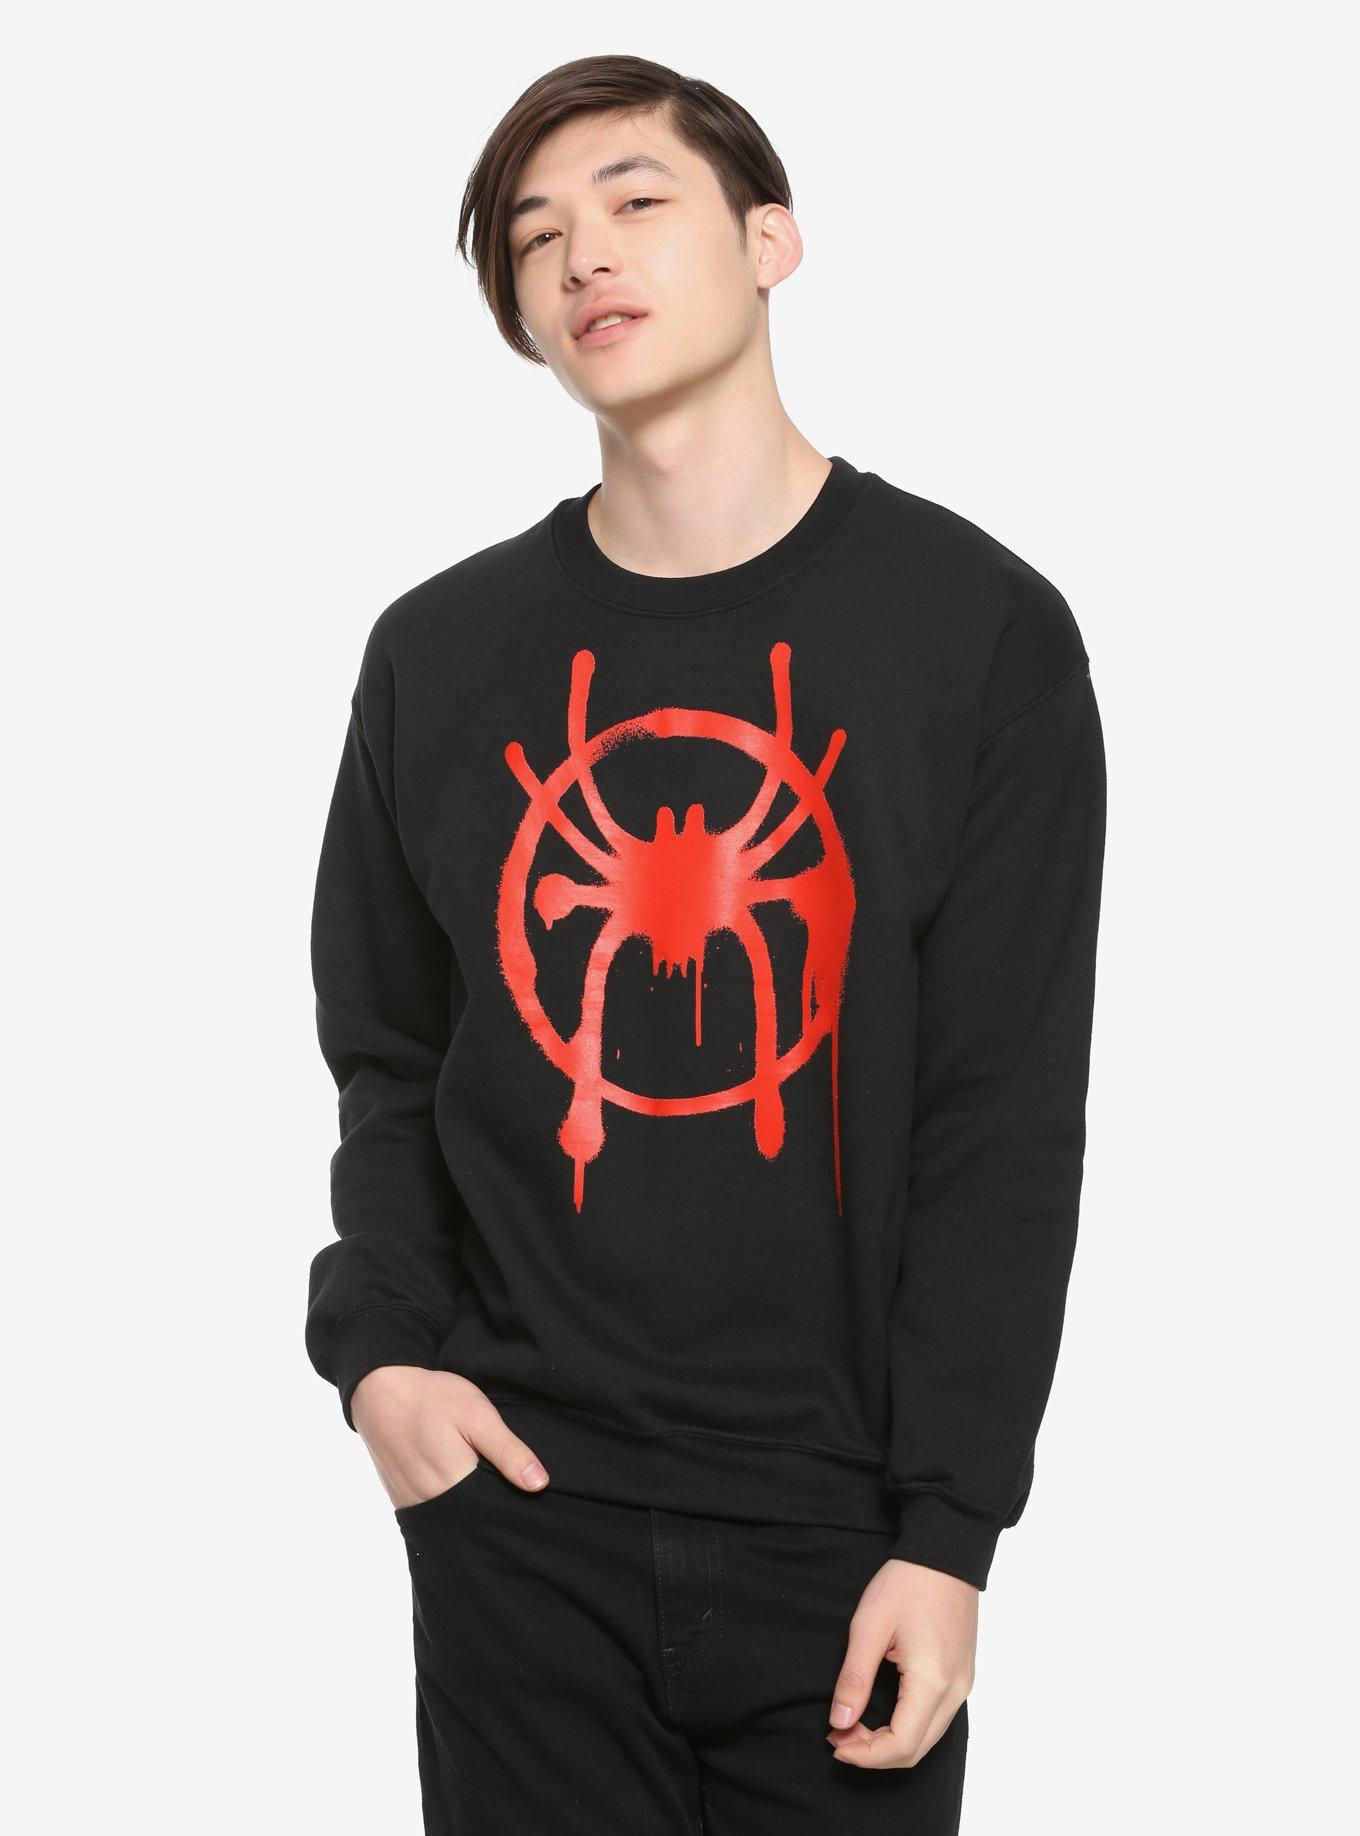 At hot topic #hottopic #spidermanacrossthespiderverse #milesmorales #s